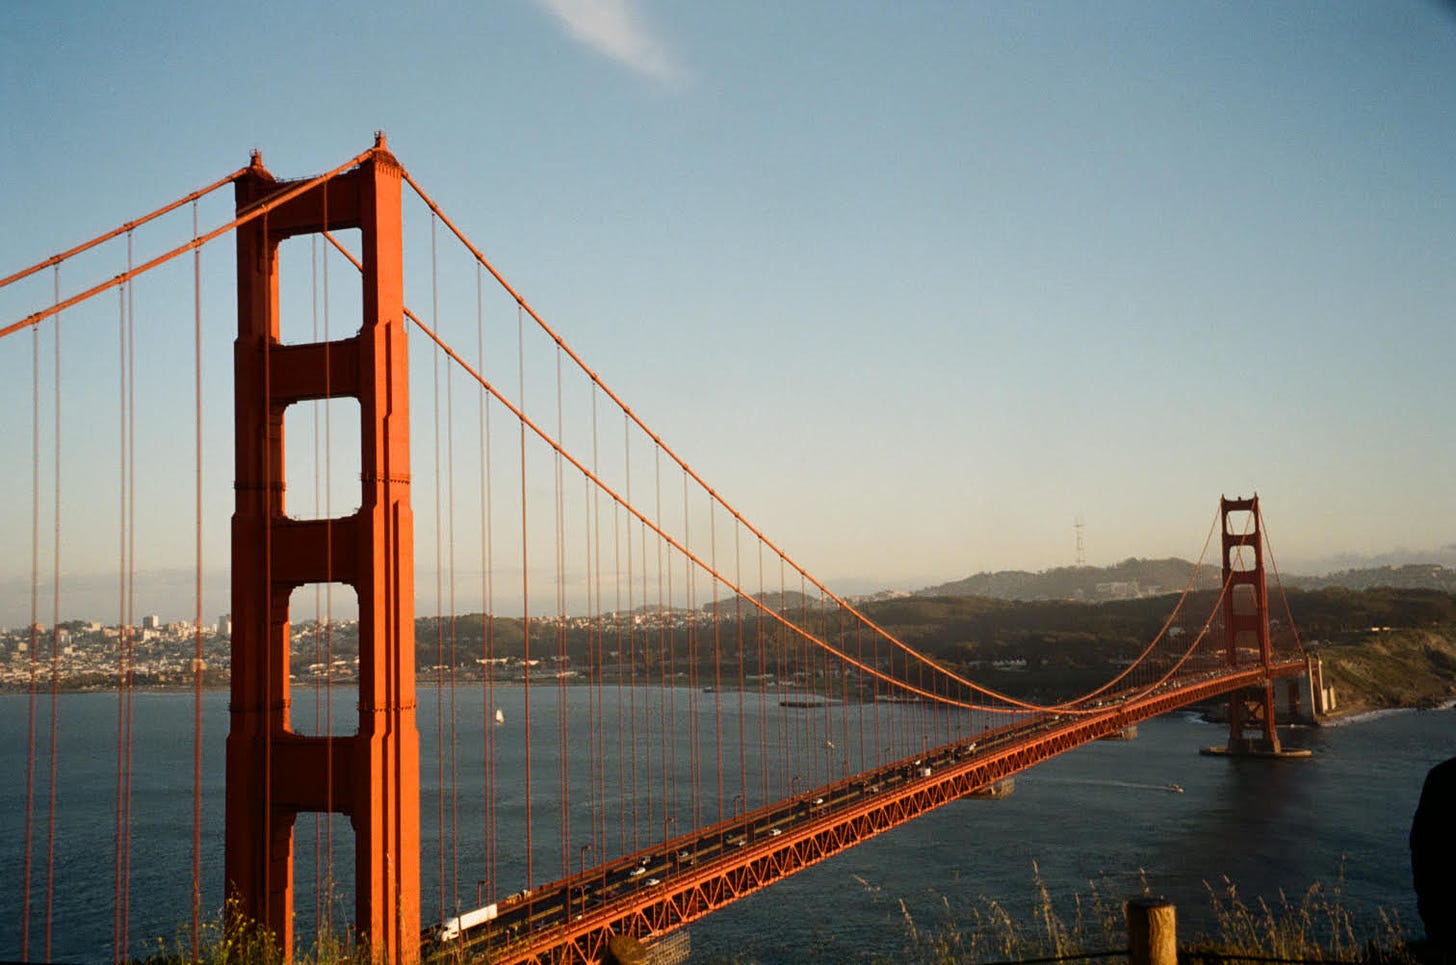 Film picture of the golden gate bridge and the SF skyline